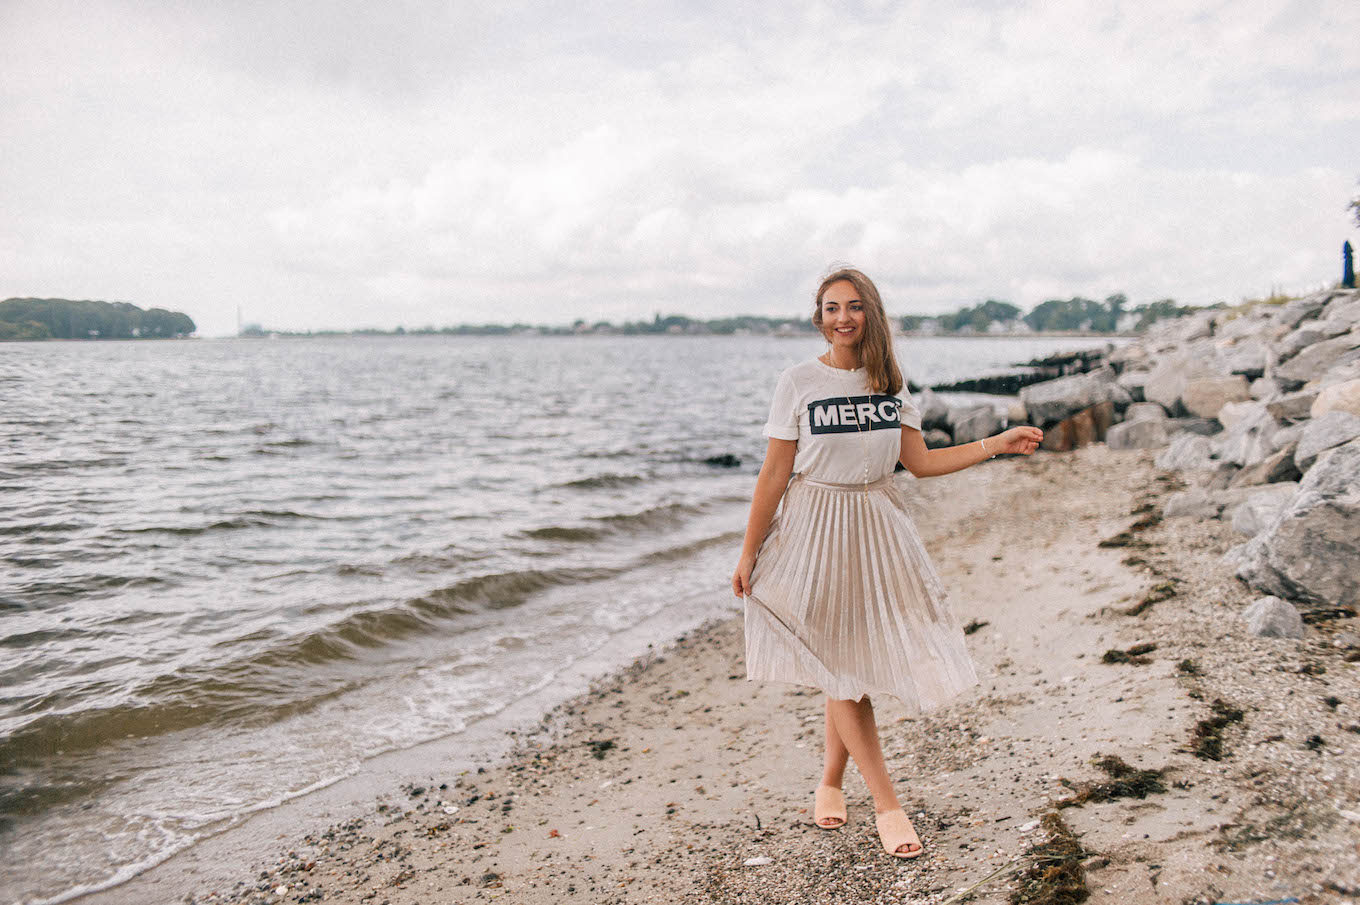 How to Style a Graphic Tee | The Coastal Confidence by Aubrey Yandow